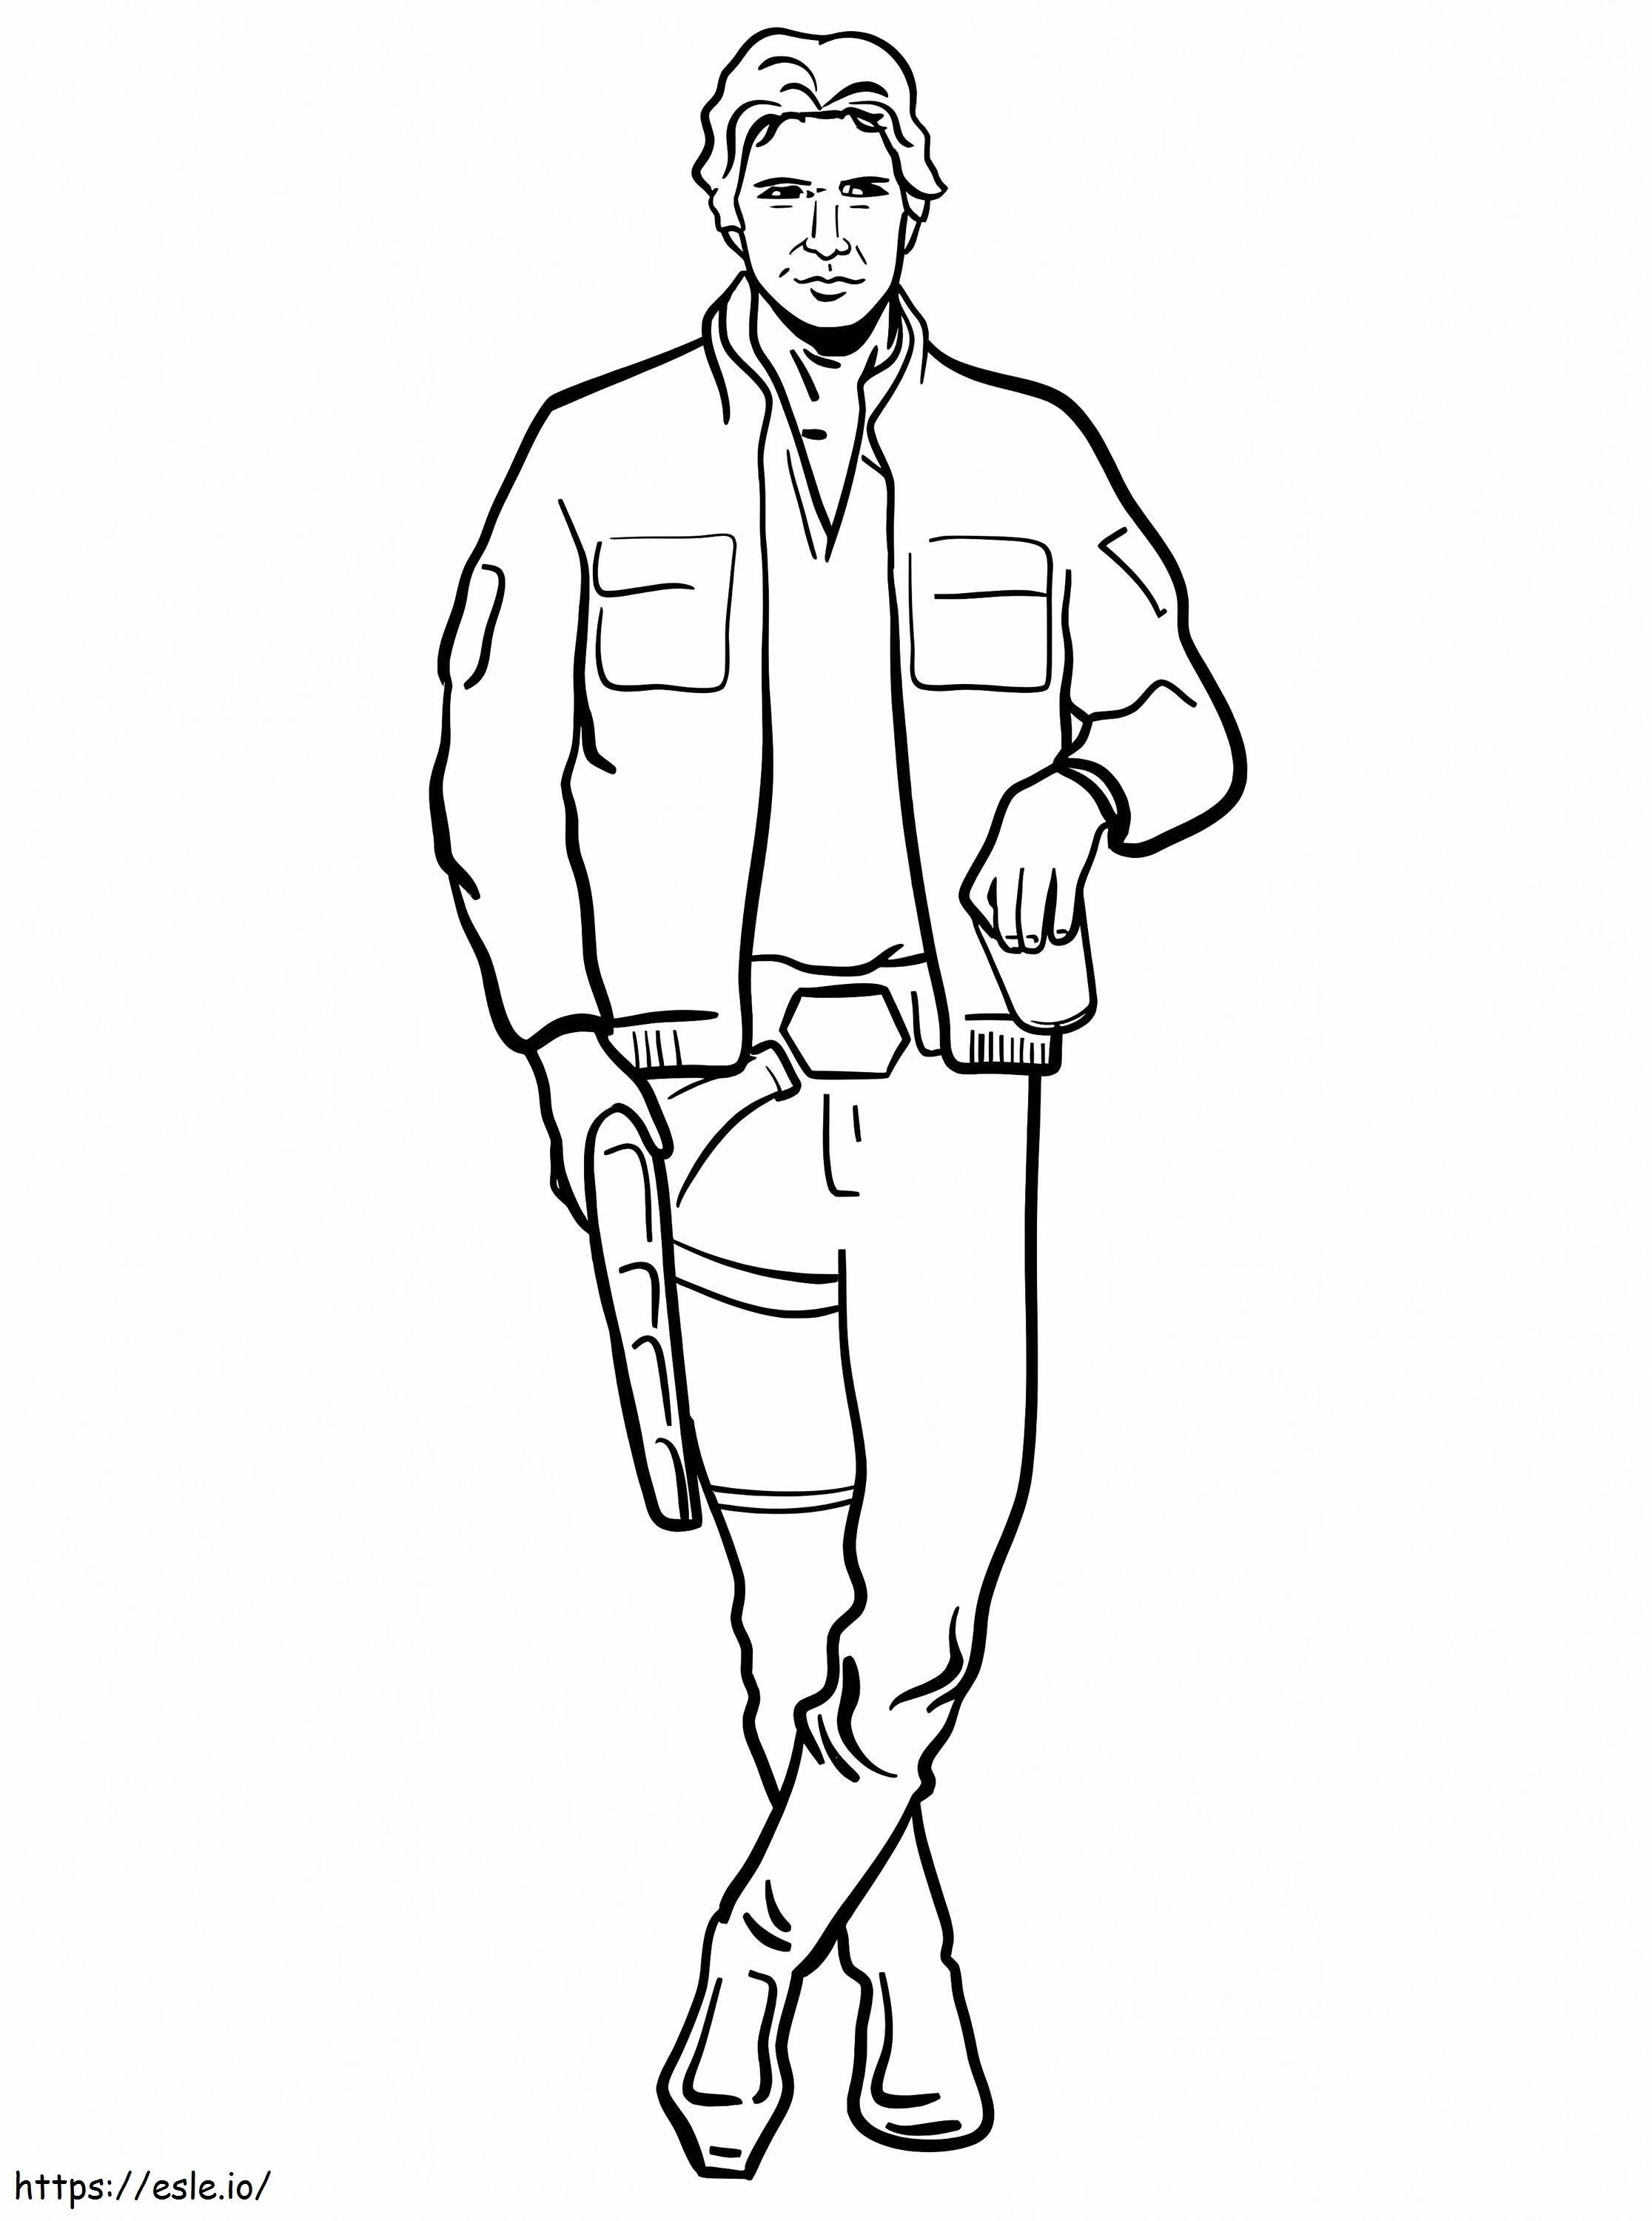 Amazing Han Solo coloring page